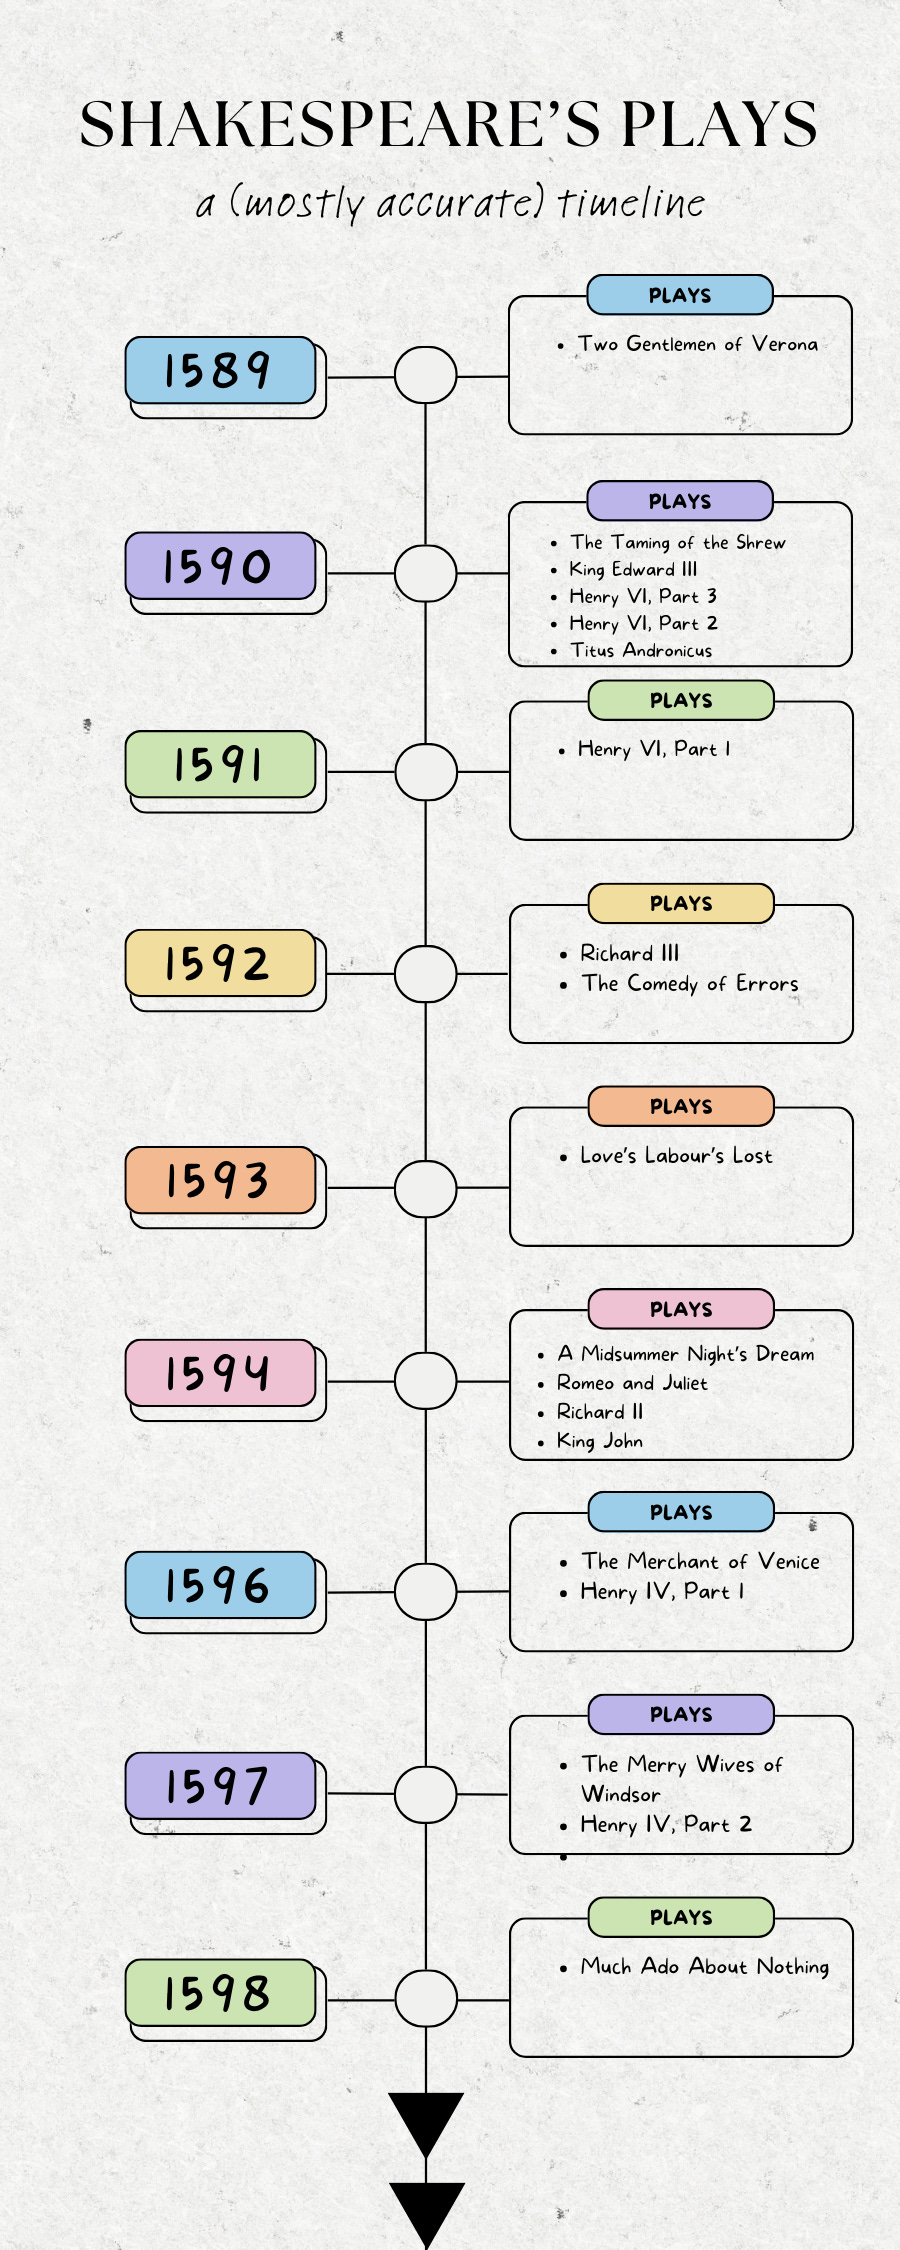 Chronology of Shakespeare's plays - Wikipedia